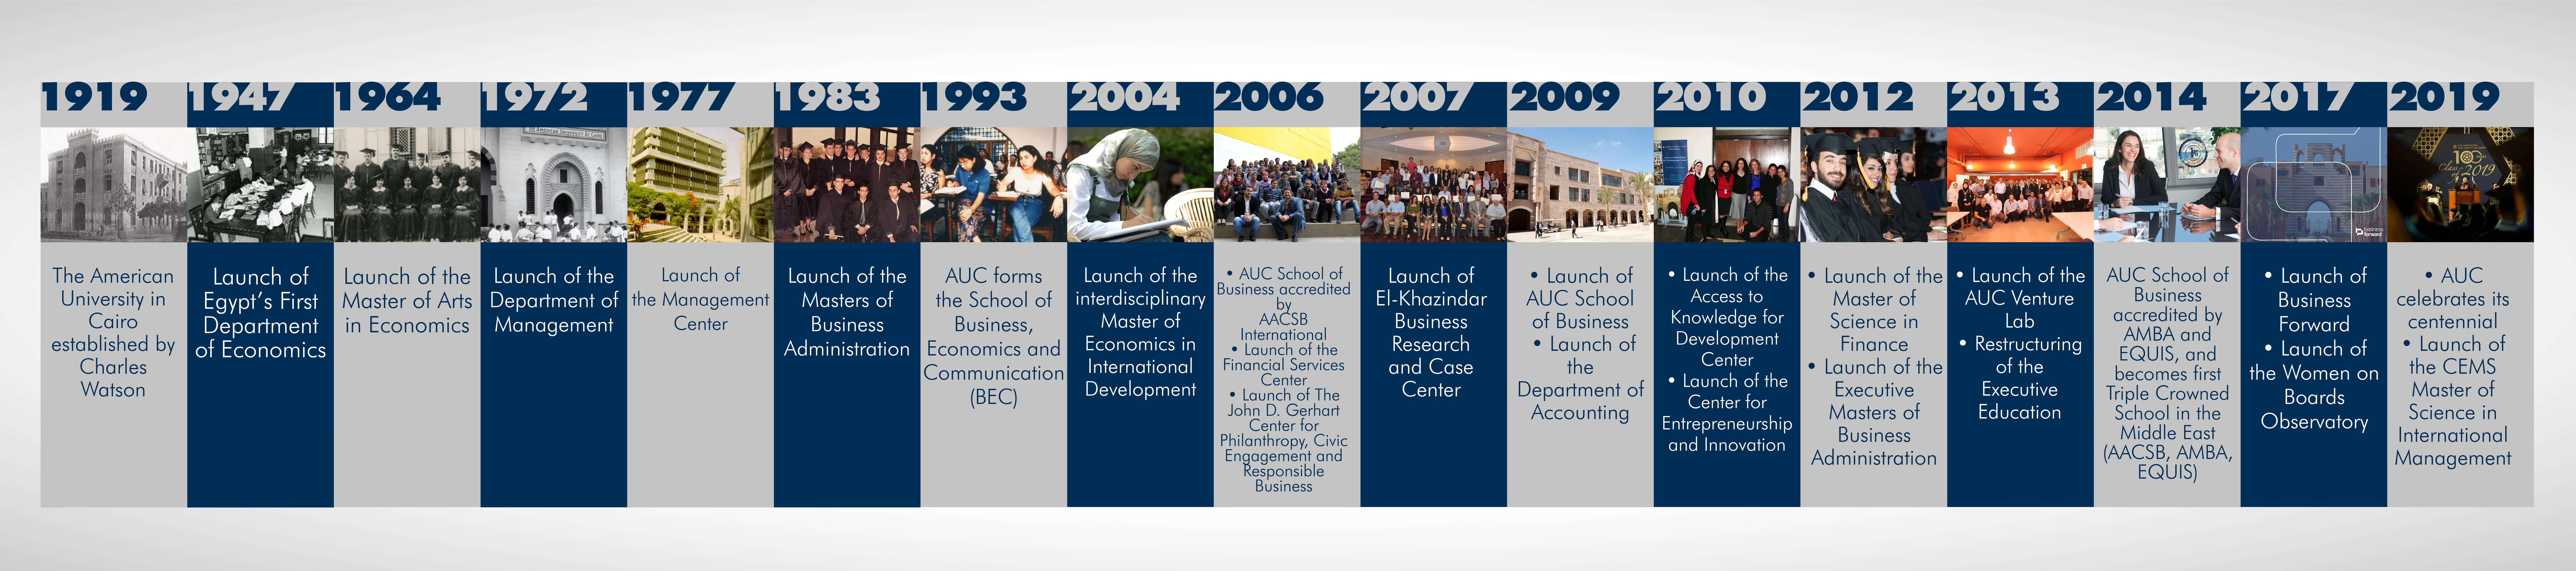 School of business history timeline